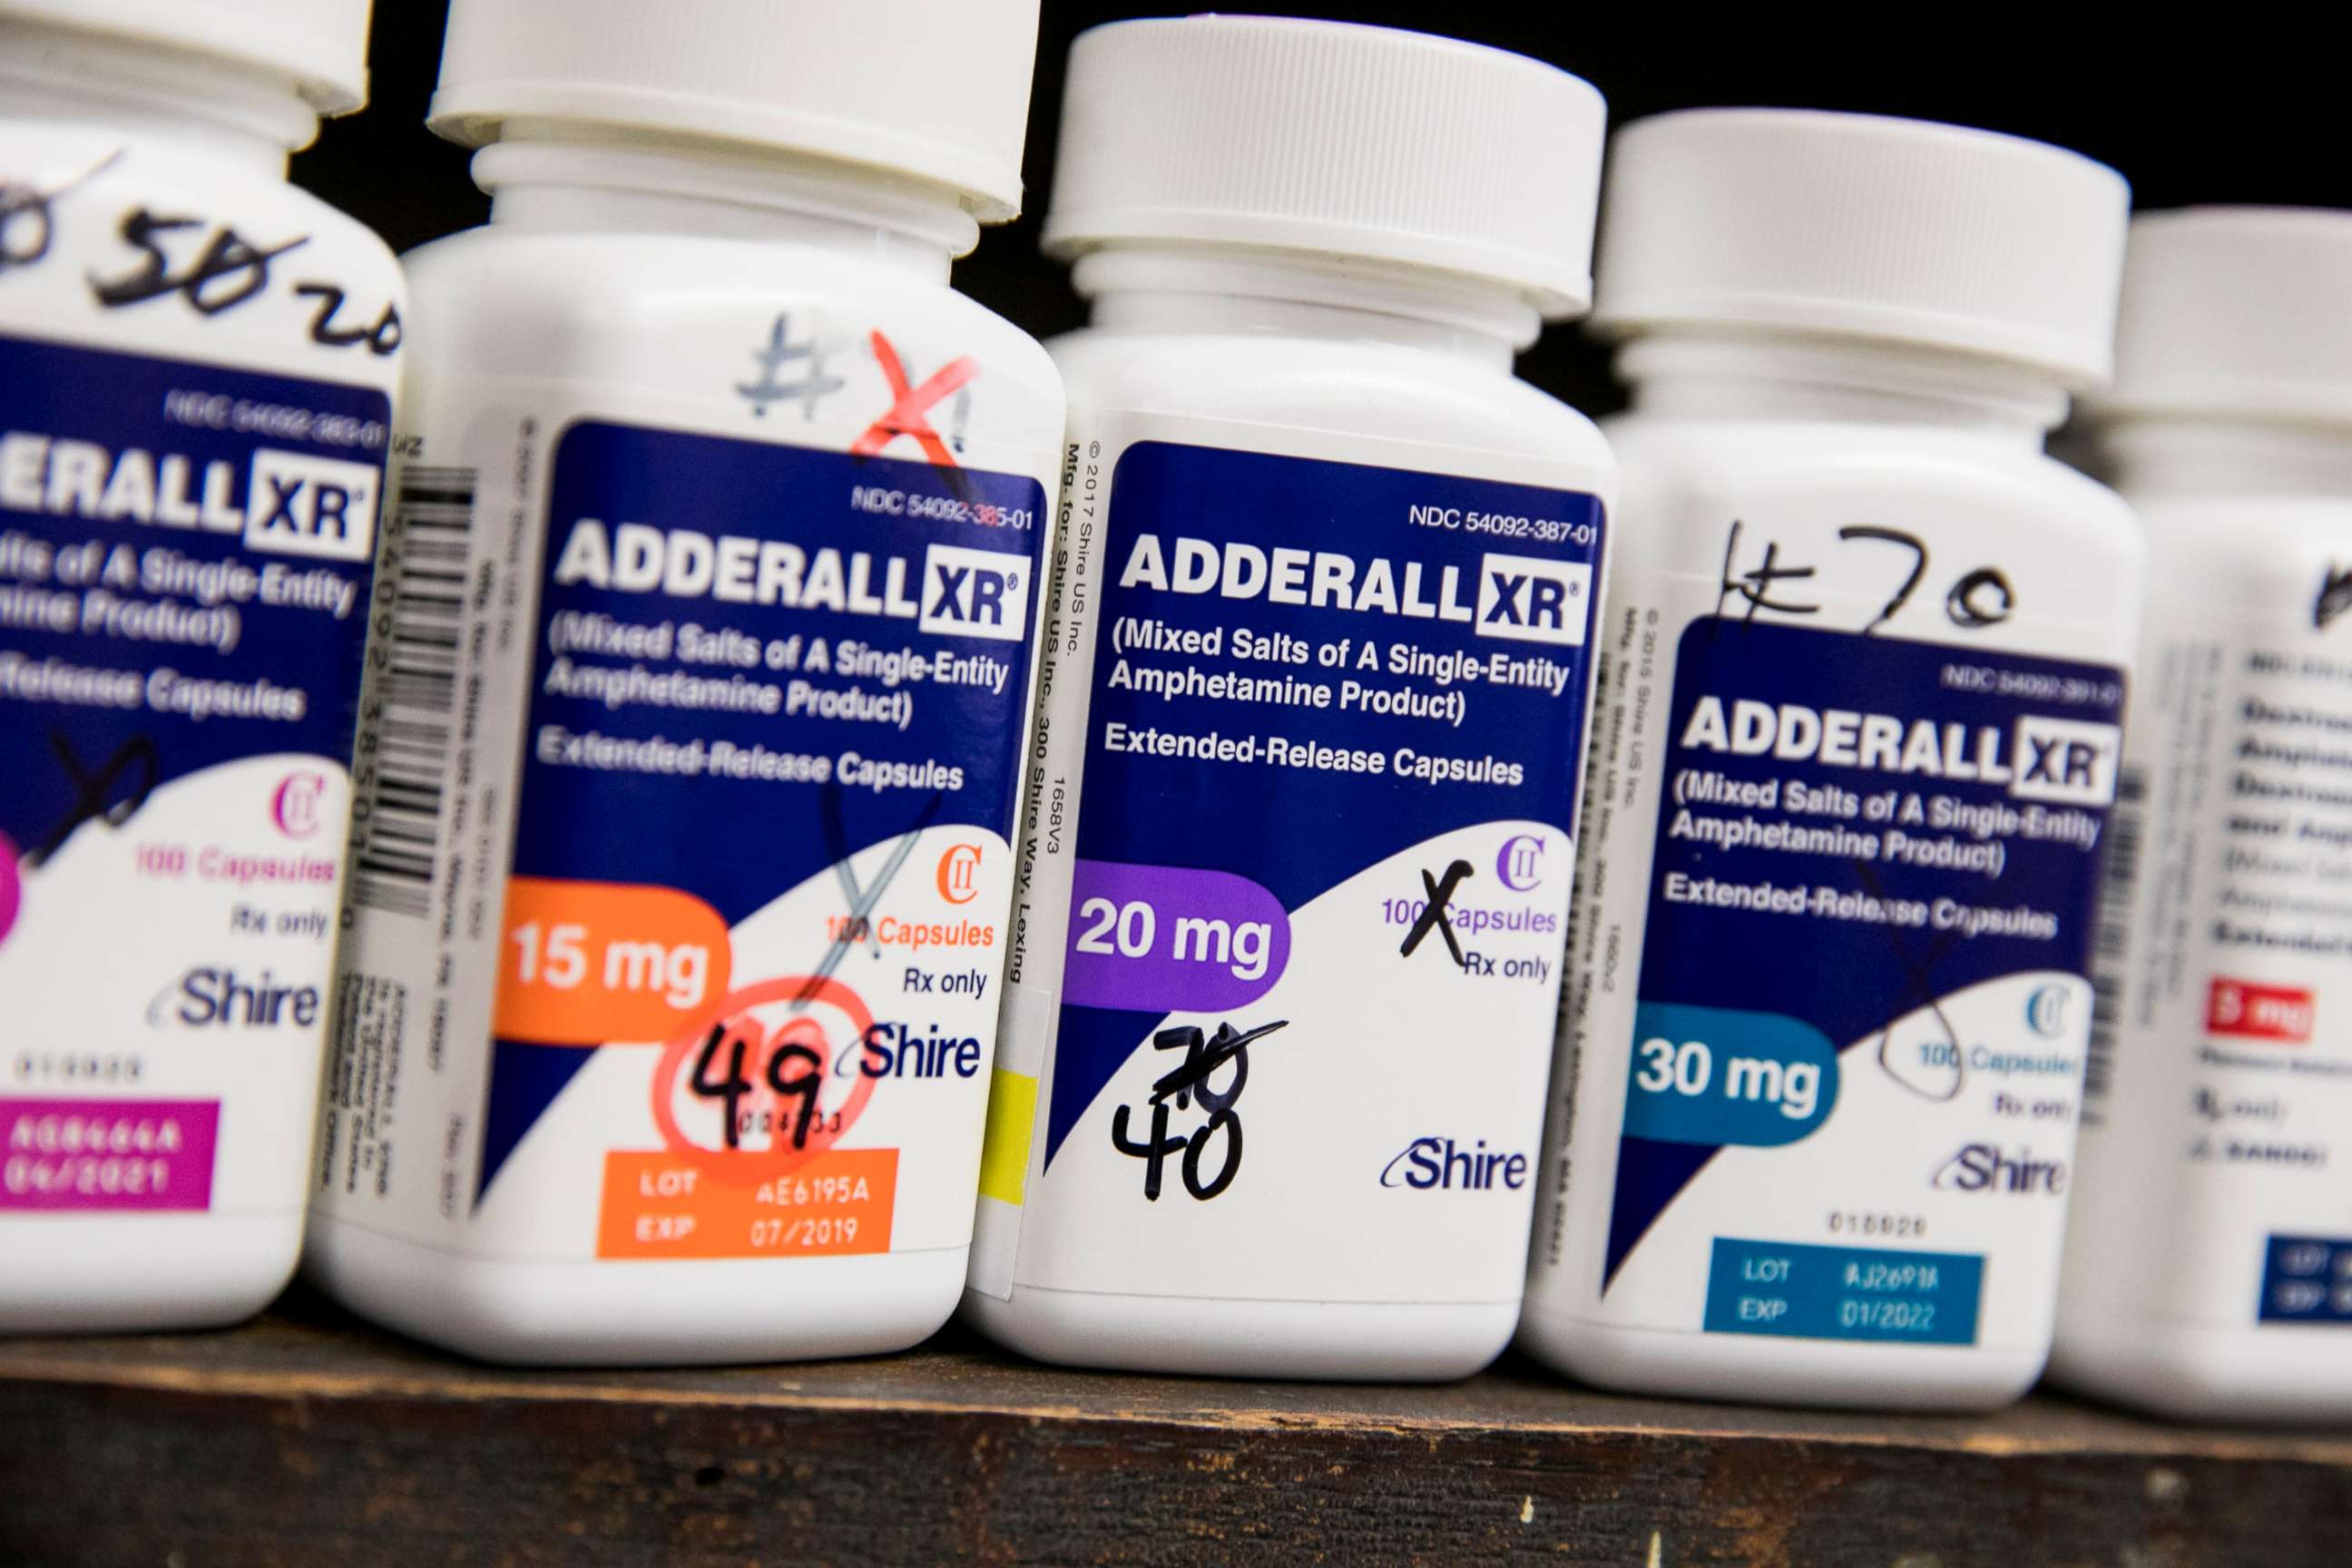 PHOTO: Bottles of Adderall XR prescription pharmaceuticals photographed in a pharmacy in Remington, Va., Feb. 26, 2019.